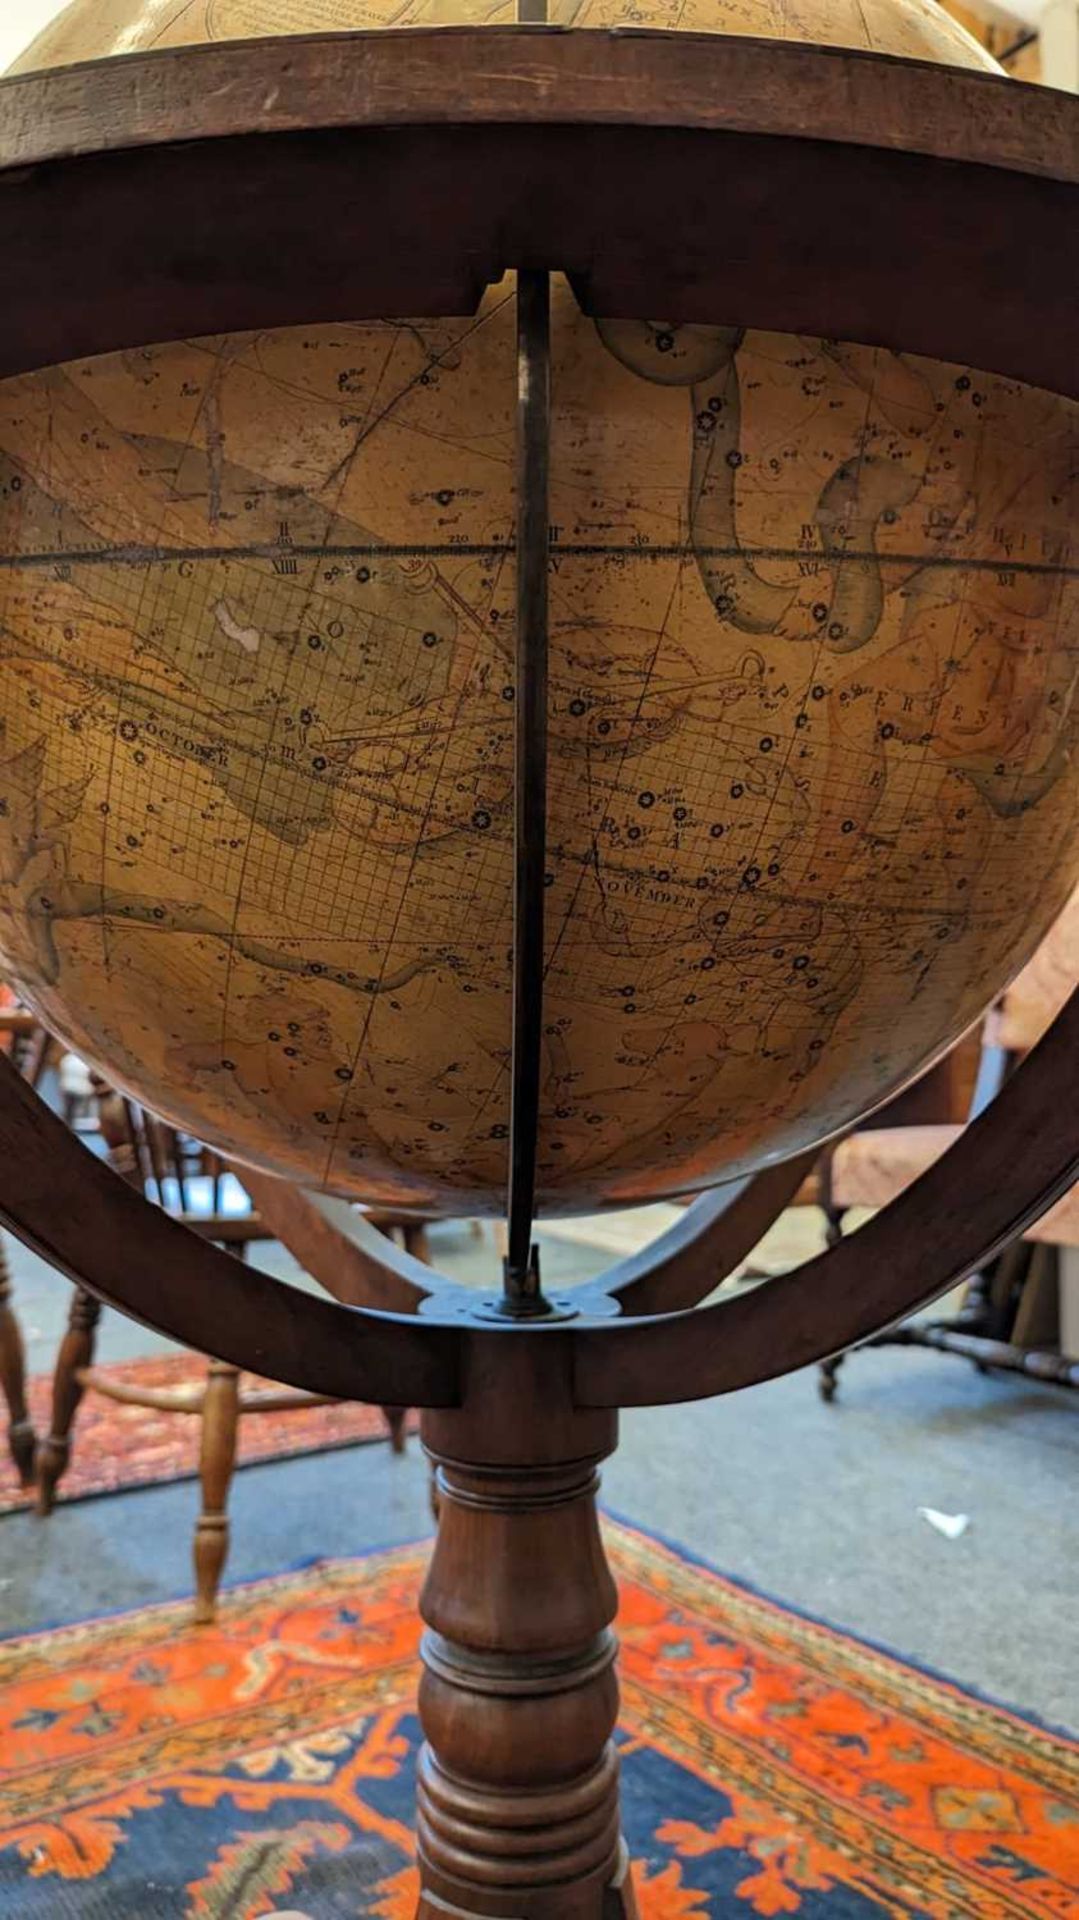 A large celestial library globe by J & W Cary, - Image 12 of 84